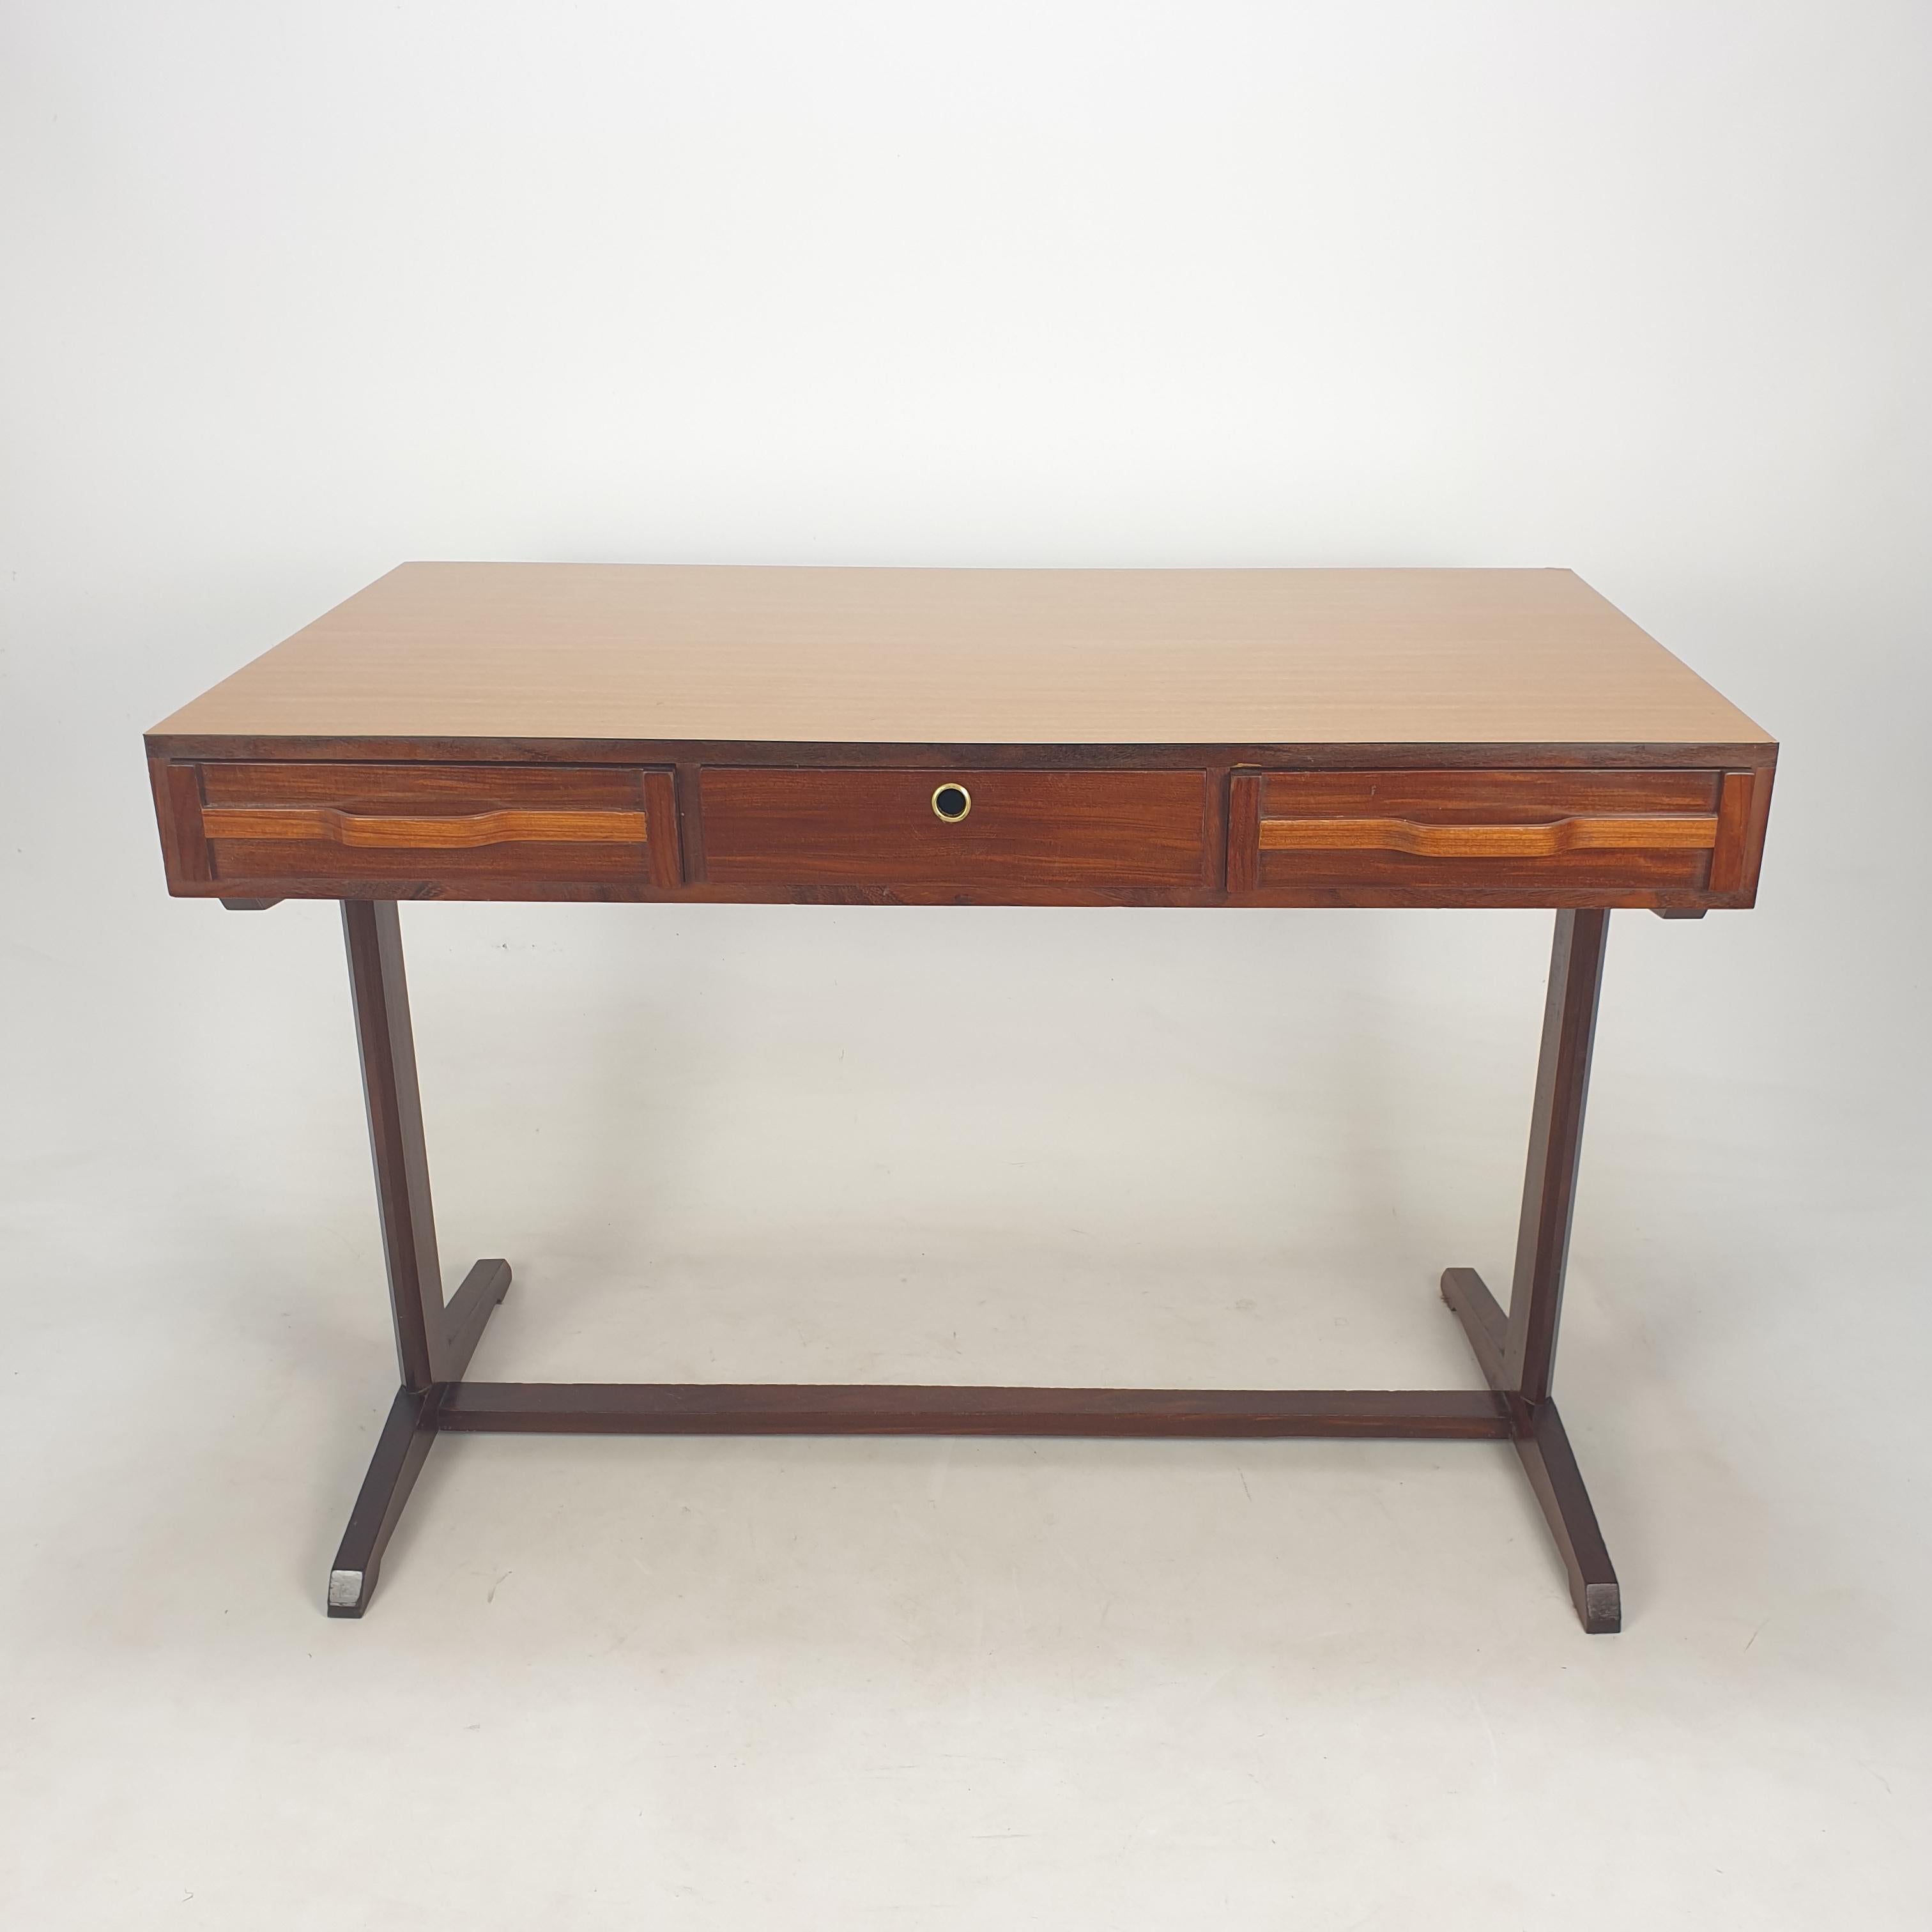 Very nice writing desk, designed by Giancarlo Frattini.
It is fabricated in Italy in the 50's.

This desk has three drawers and is in good vintage condition (see the pictures).
 